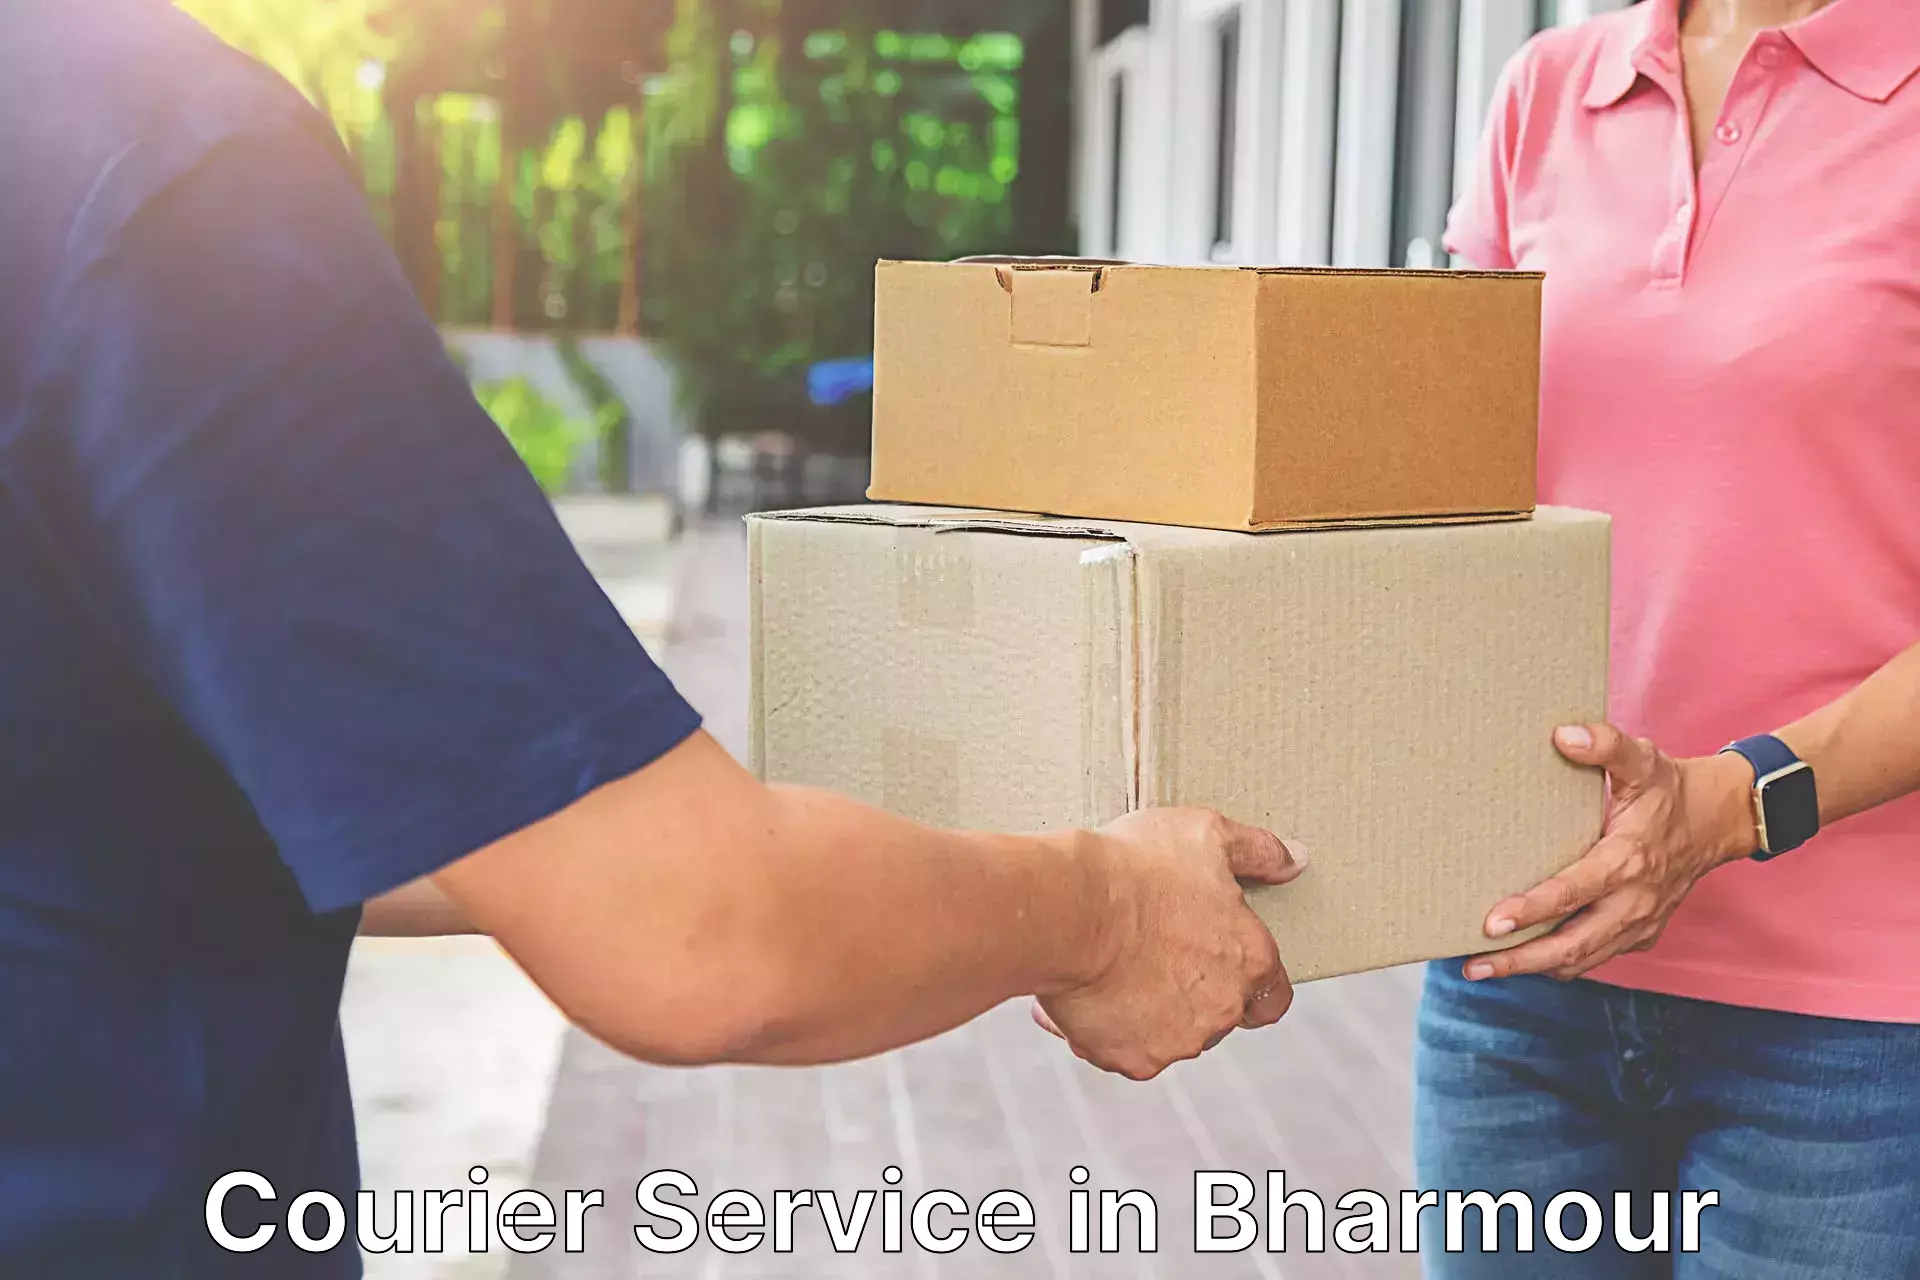 Round-the-clock parcel delivery in Bharmour